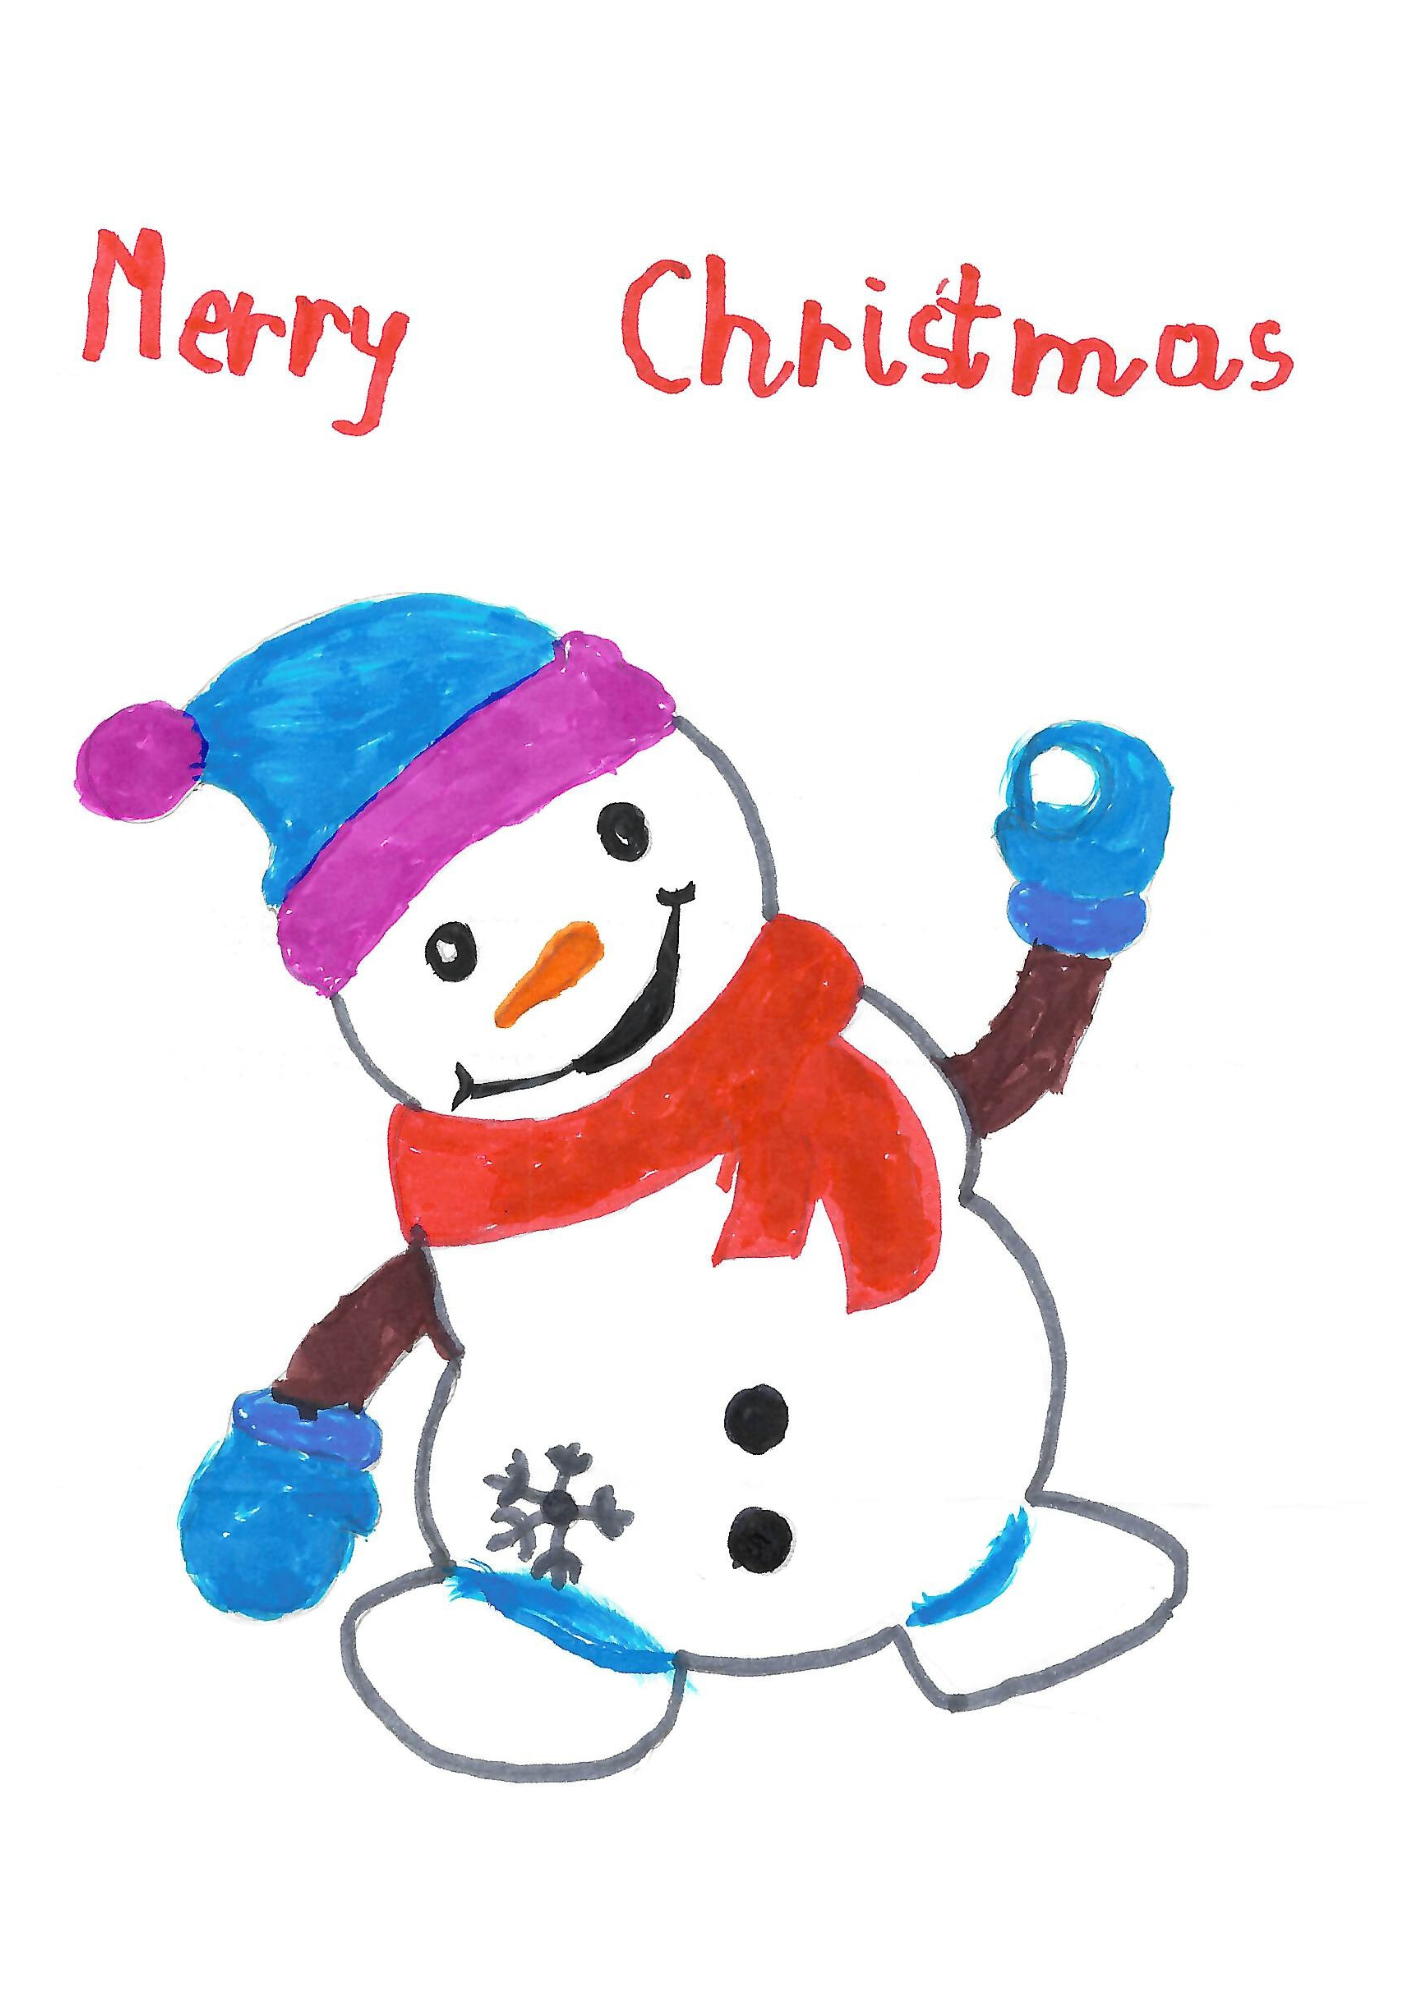  The image shows a cheerful, hand-drawn snowman against a white background. The snowman is depicted with a jovial expression, featuring a wide smile, a carrot nose, and two eyes made of small black dots. It wears a bright blue hat with a purple band and a pink pompom on top, and a red scarf is wrapped around its neck. One of the snowman's brown branches for arms is raised, holding a blue mitten, while the other arm is adorned with a mitten of the same color. A small snowflake design is visible on the snowman's body. Above the snowman, the words "Merry Christmas" are written in a childlike red script, adding to the festive and joyful theme of the drawing.